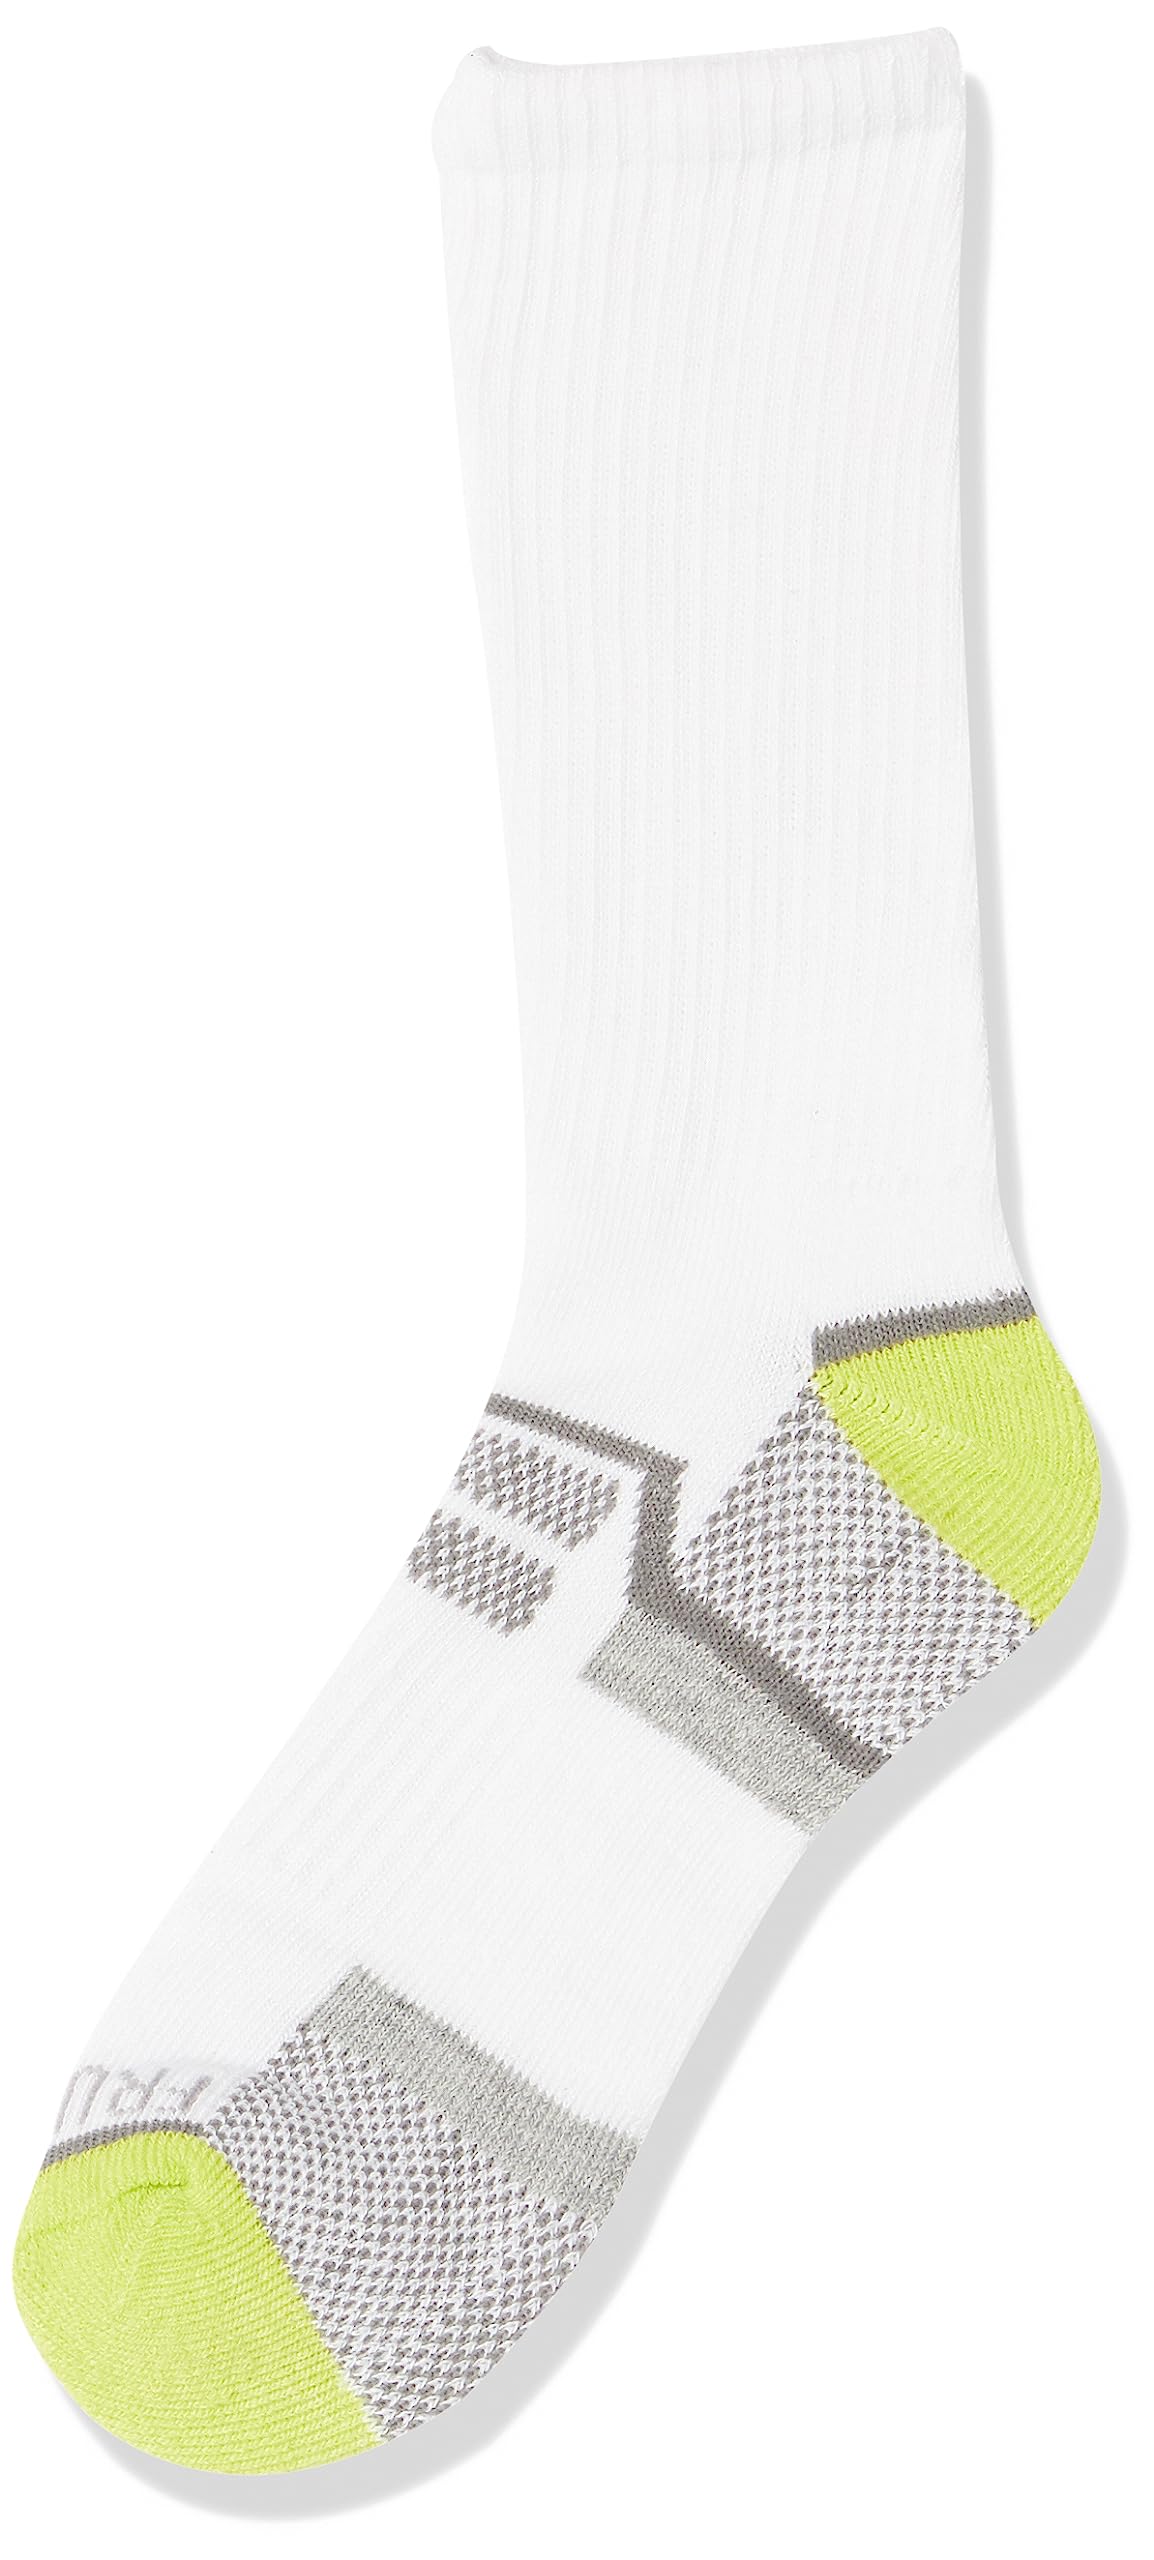 Fruit of the Loom Boys' Everyday Active Crew Socks (12 Pack)